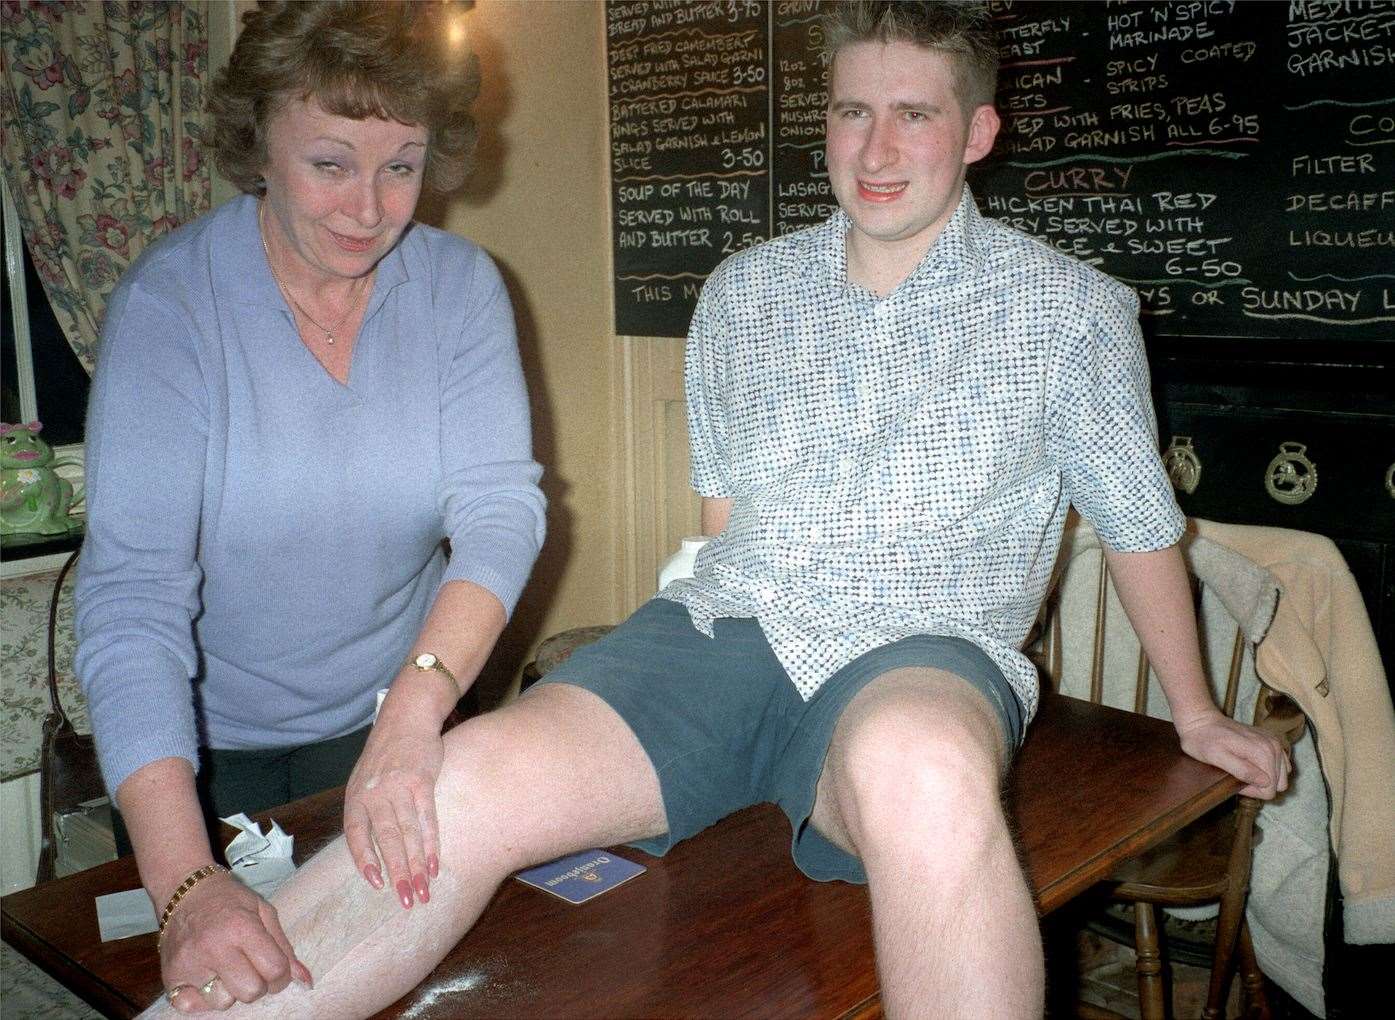 Neil Cackett has his legs waxed by Valerie Wren for charity at The Wheel Inn in 2003